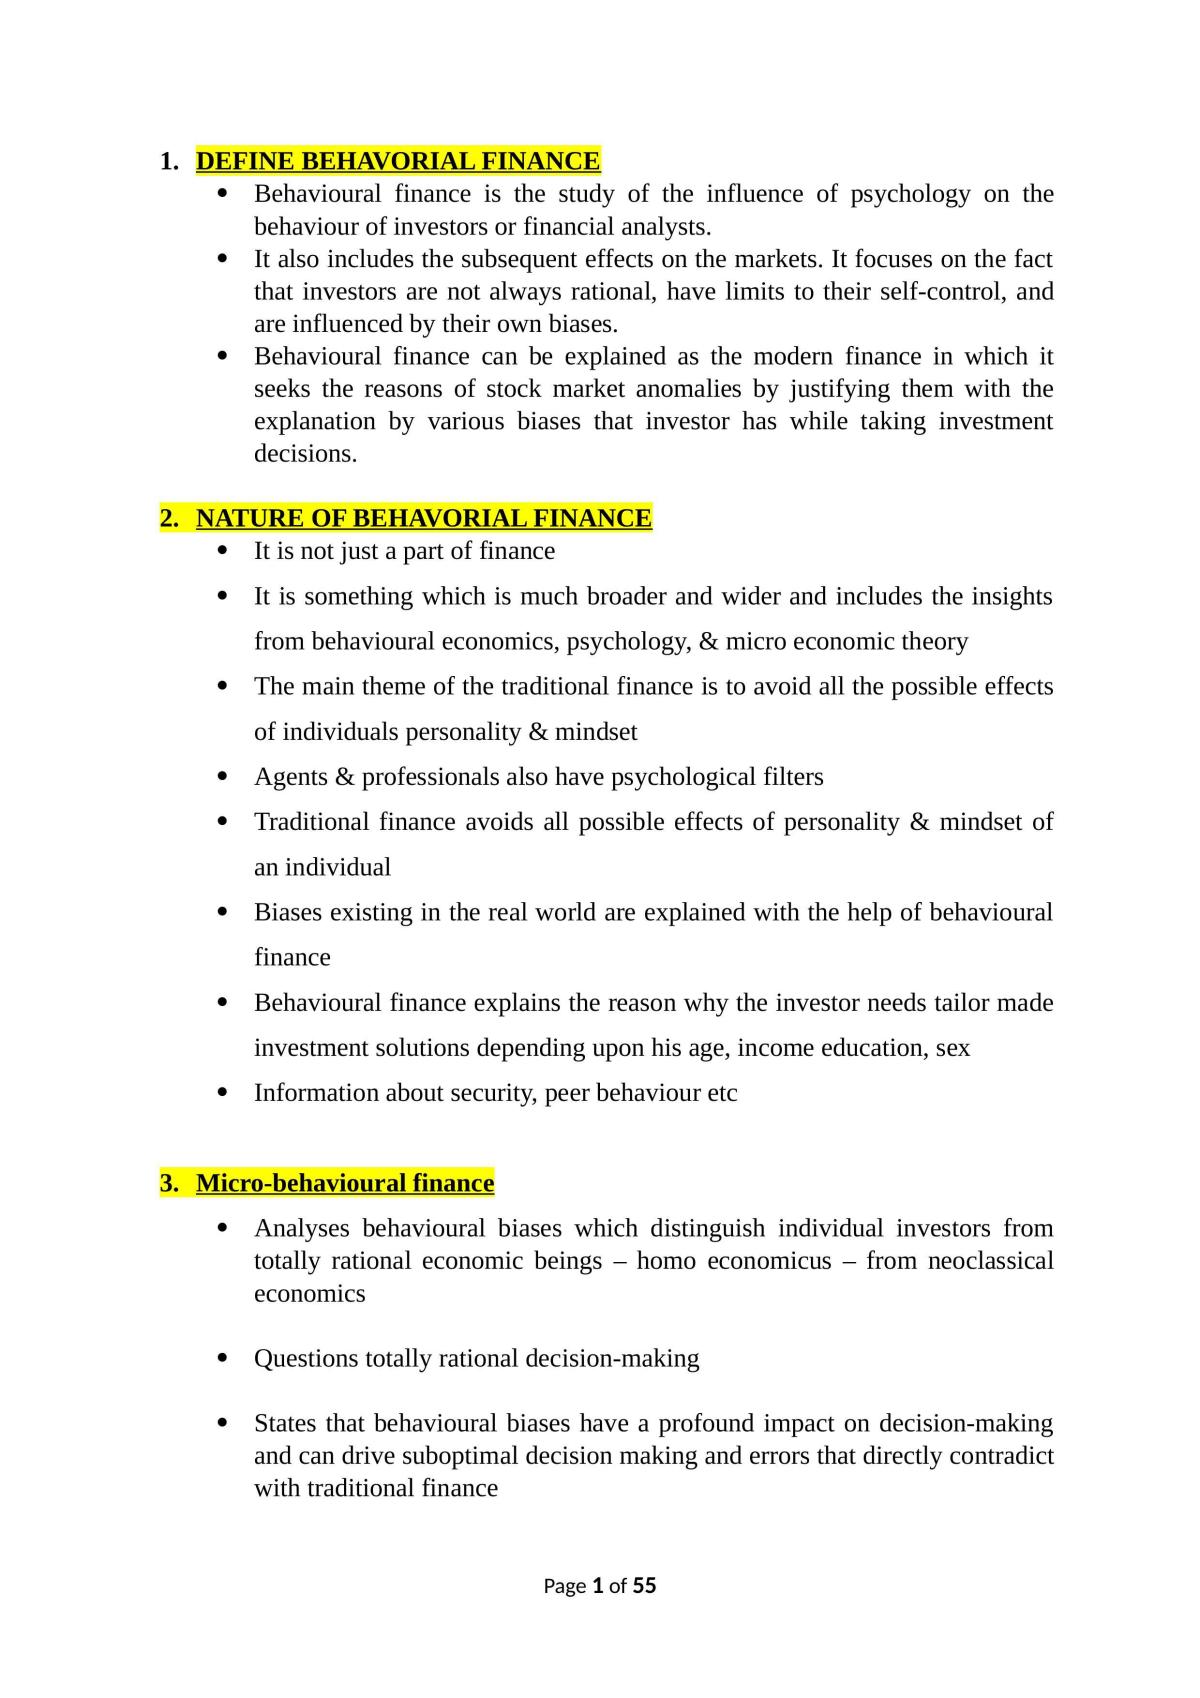 Advanced Behavioural Finance Notes - Page 1